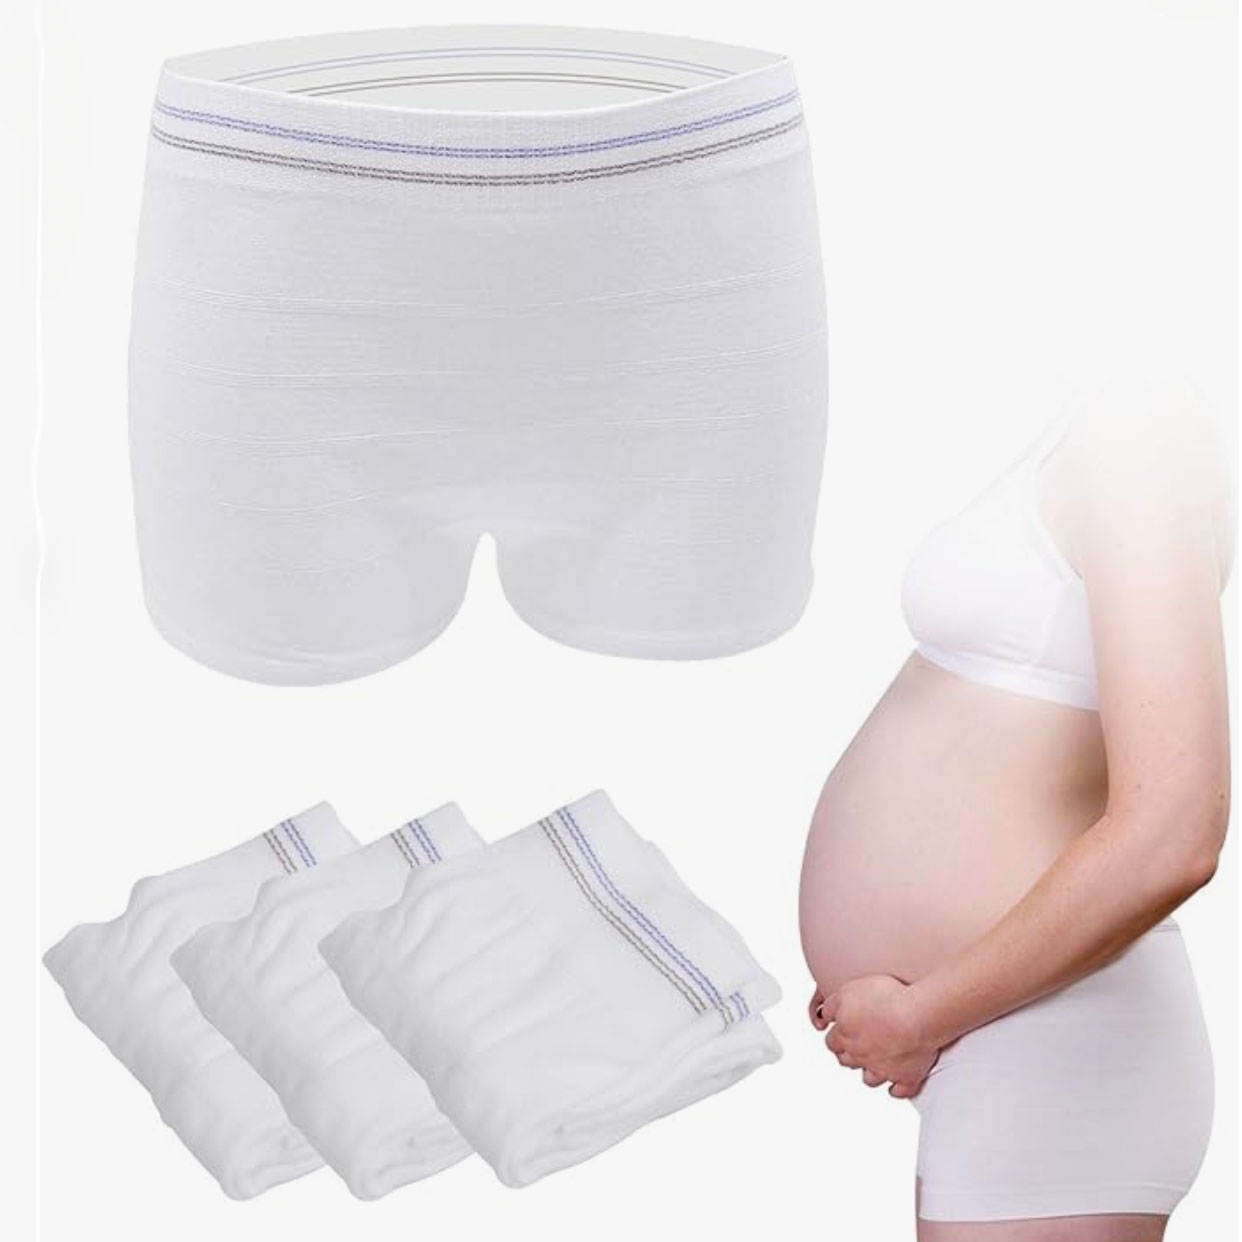 White mesh underwear and image of pregnant mom wearing product